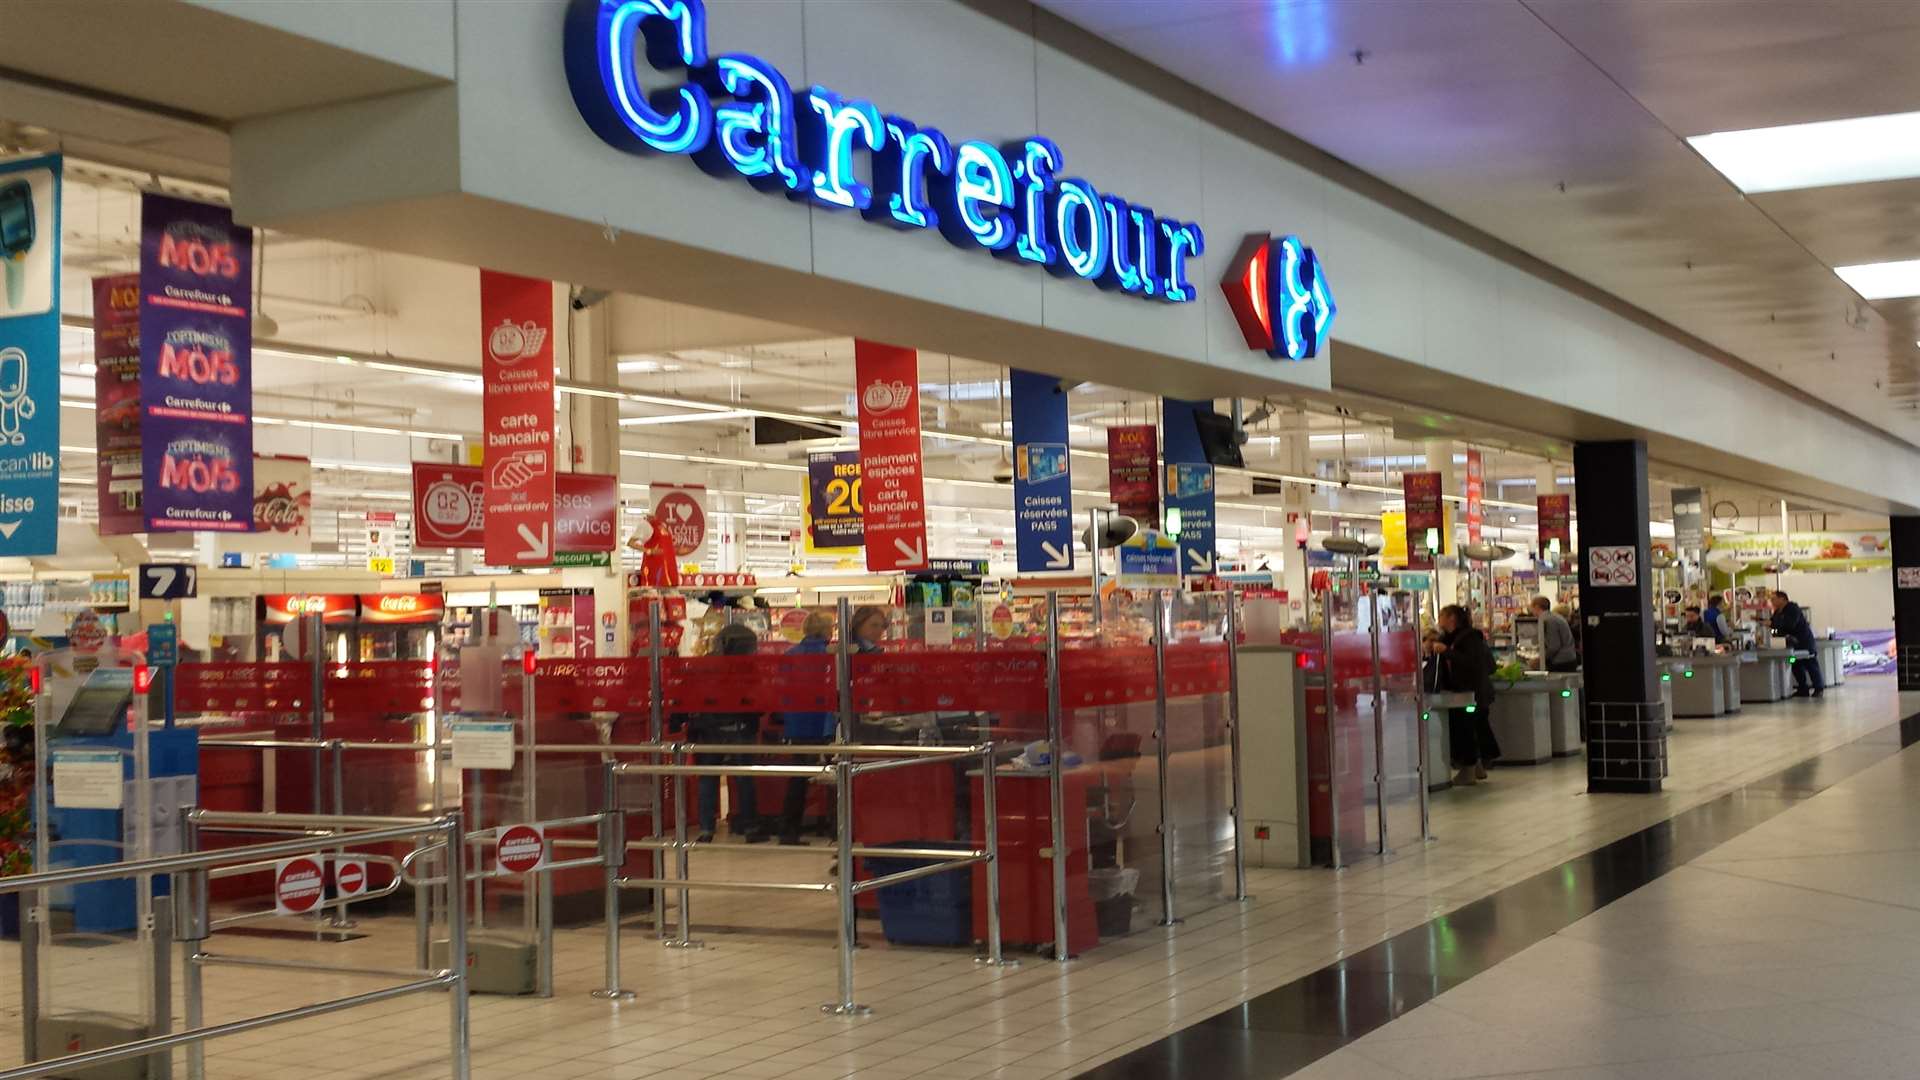 The huge Carrefour at Cite Europe